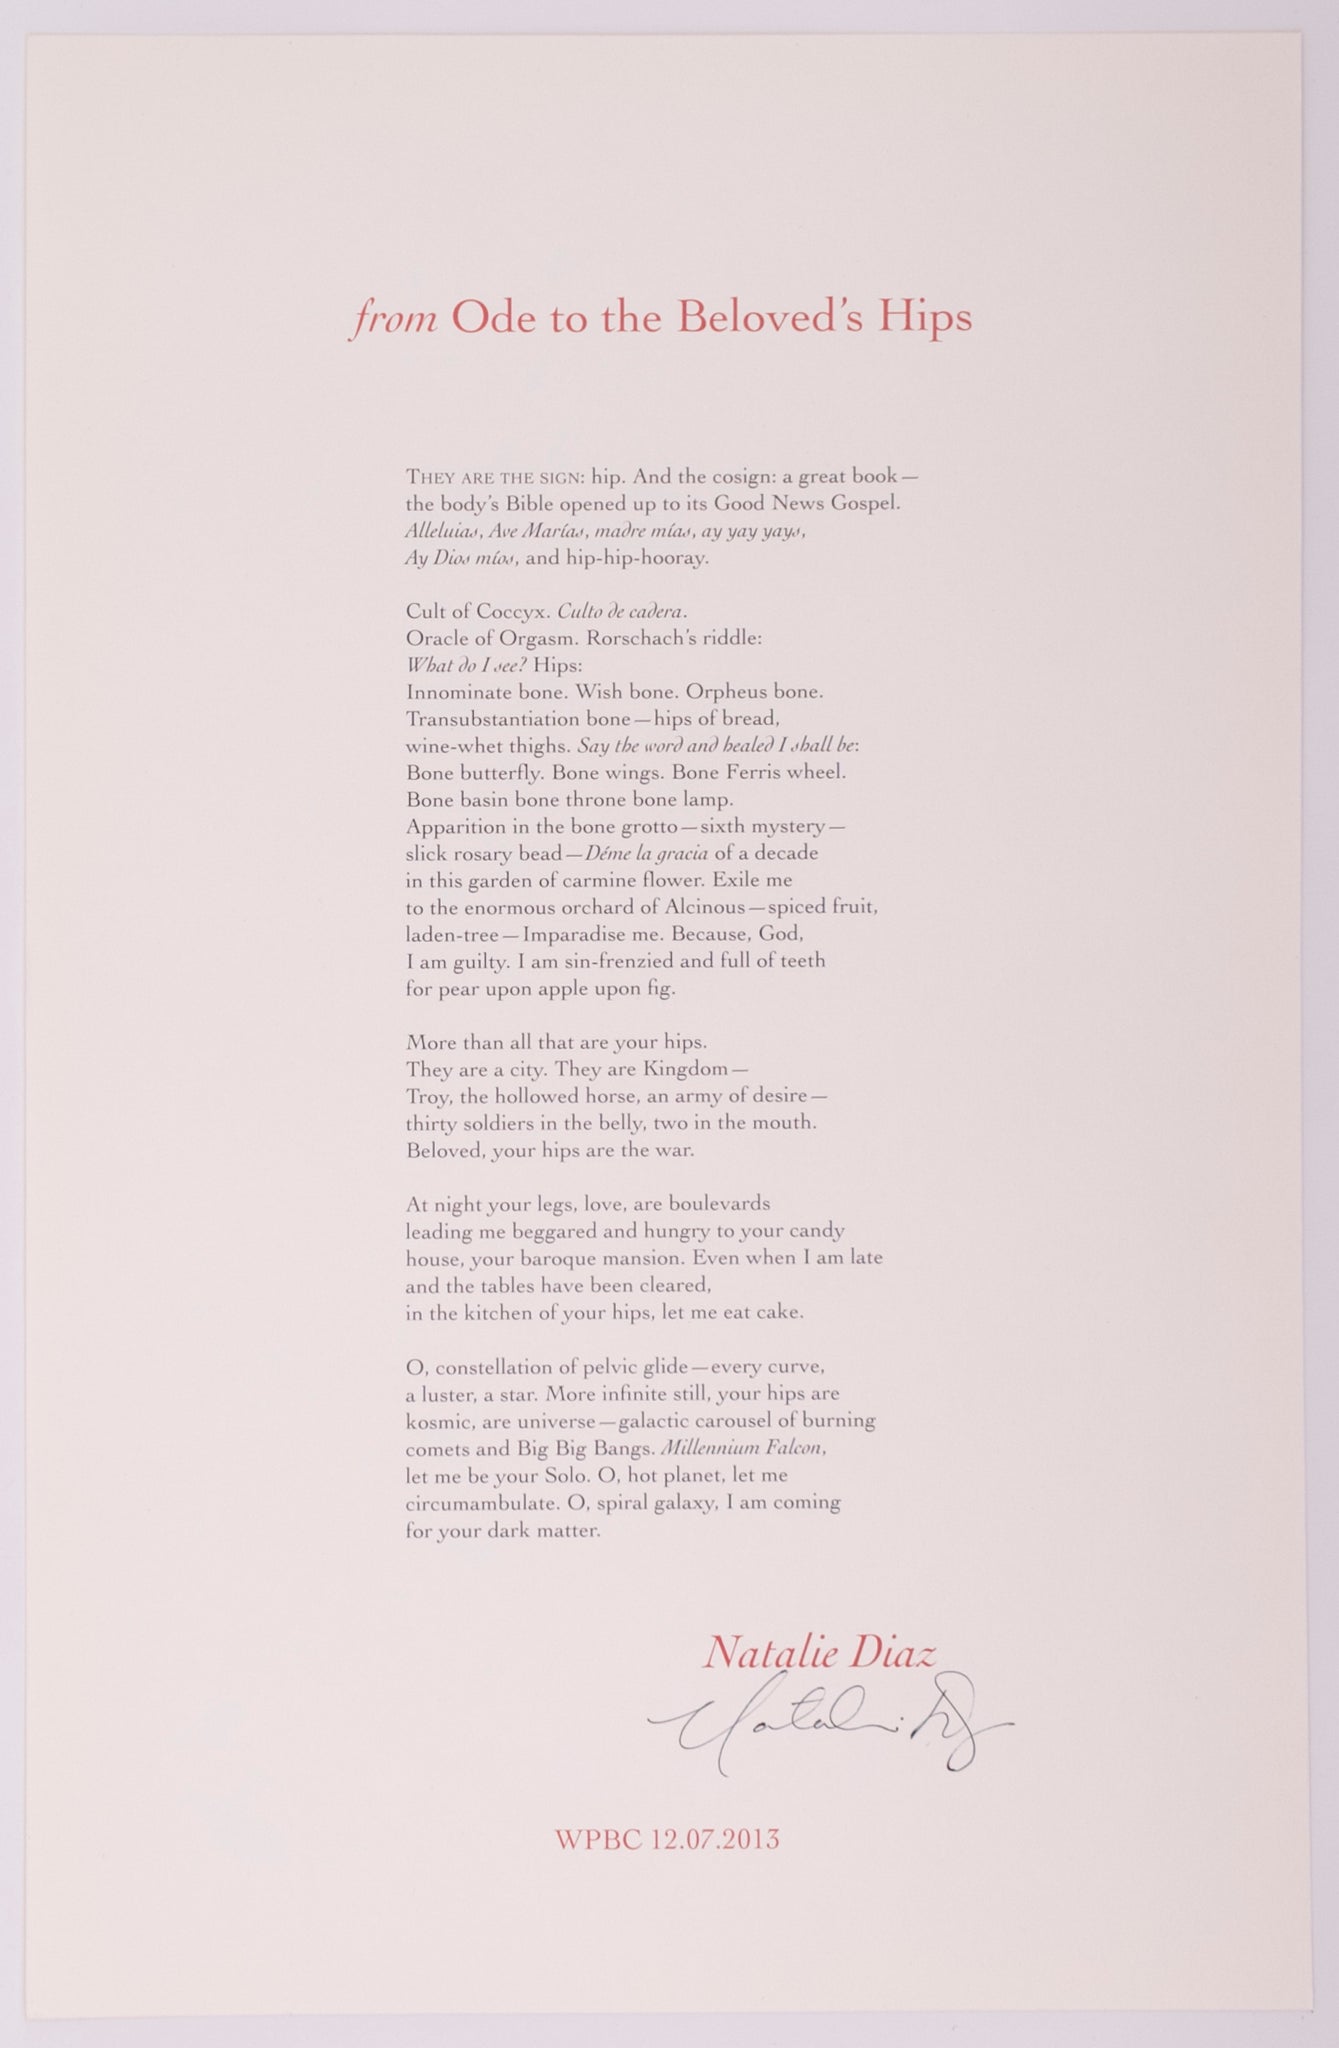 from Ode to the Beloved's Hips by Natalie Diaz (Signed)